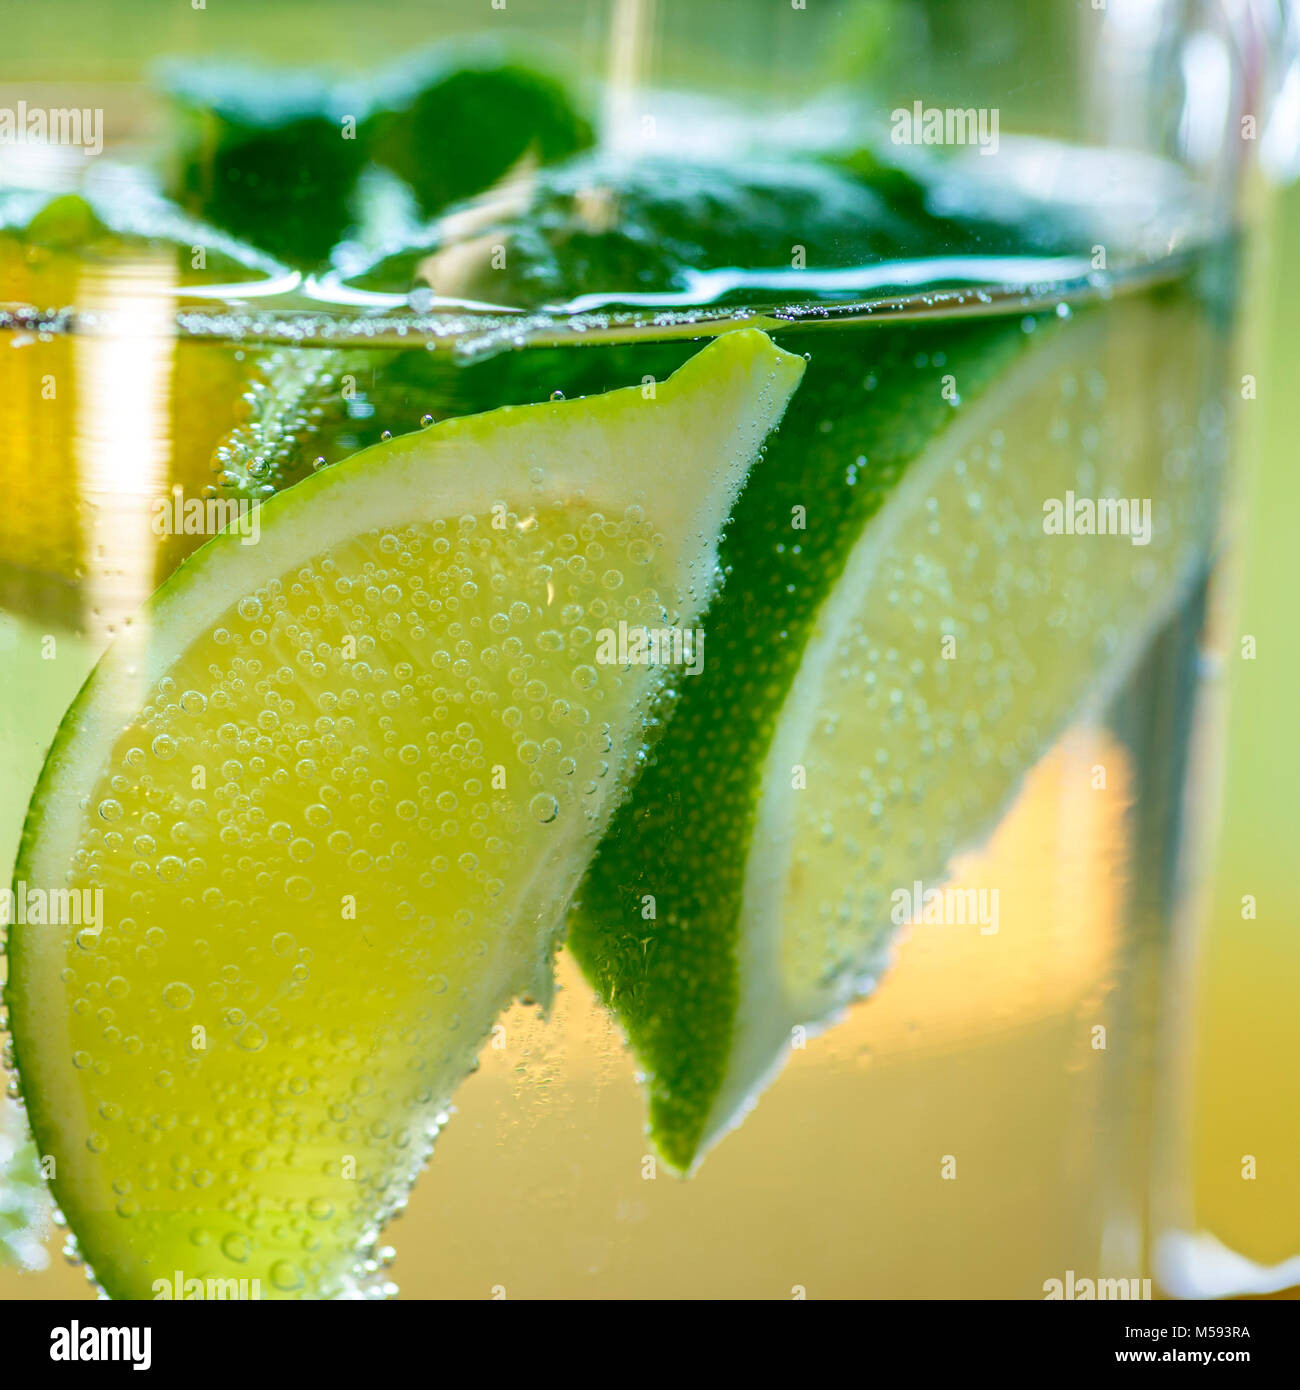 Fresh lemonade with slices of limes in a glass pot Stock Photo